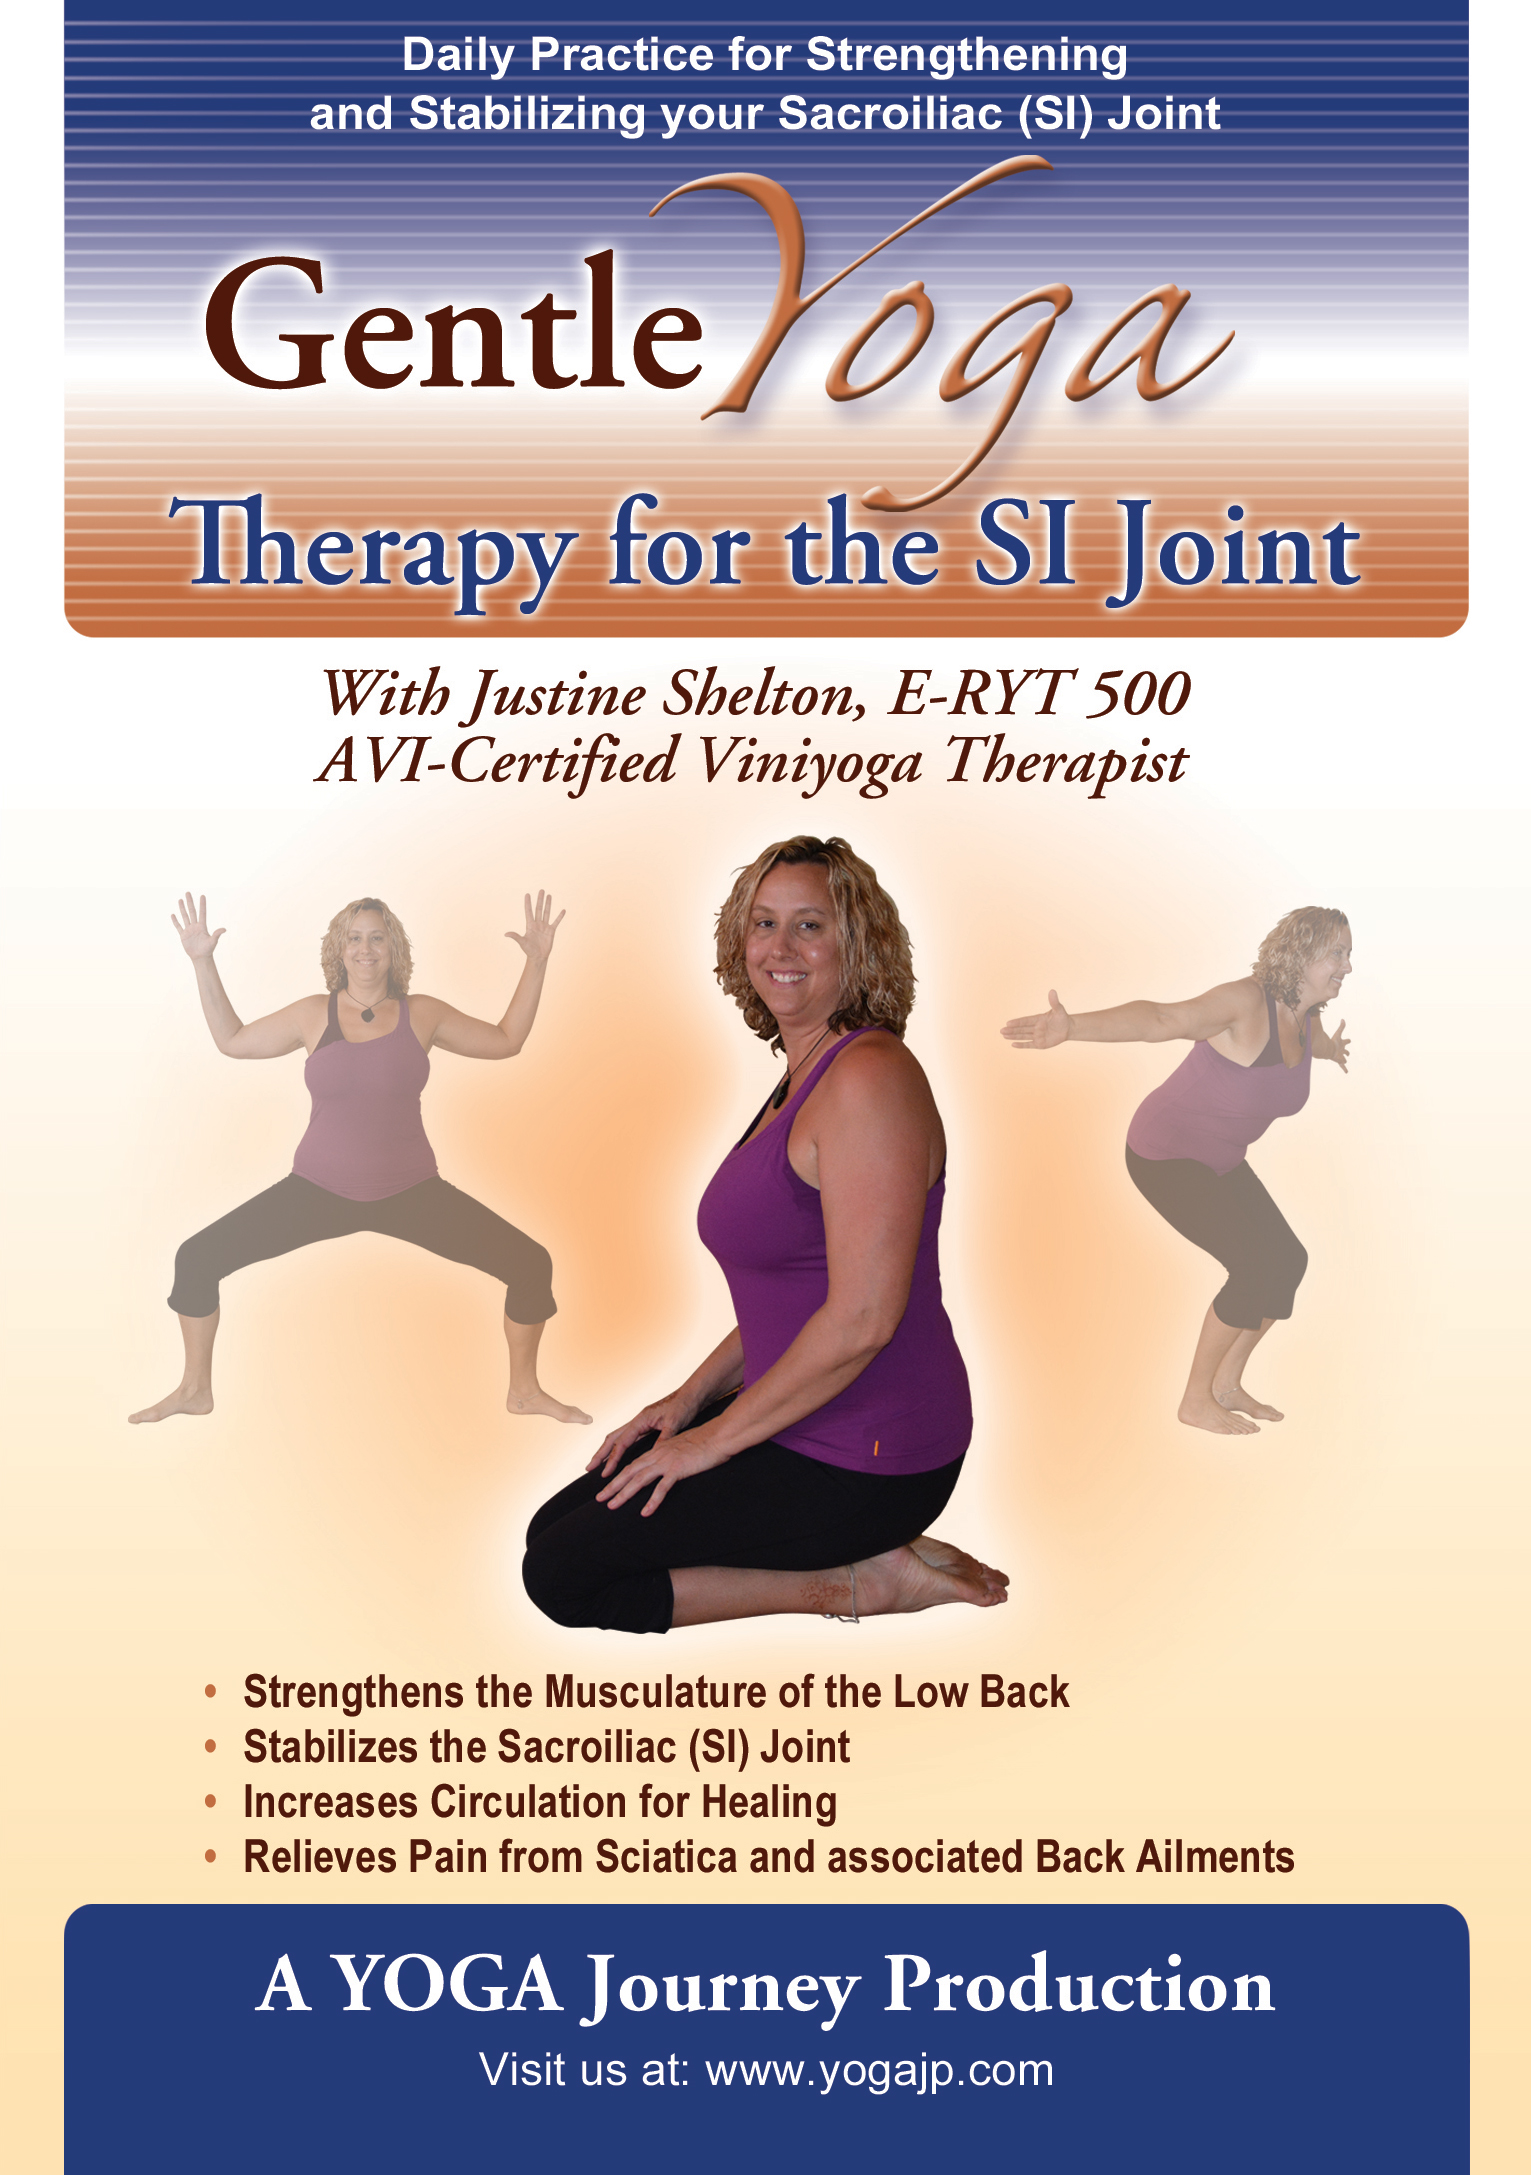 DVD: Gentle Yoga for the SI Joint with Justine Shelton